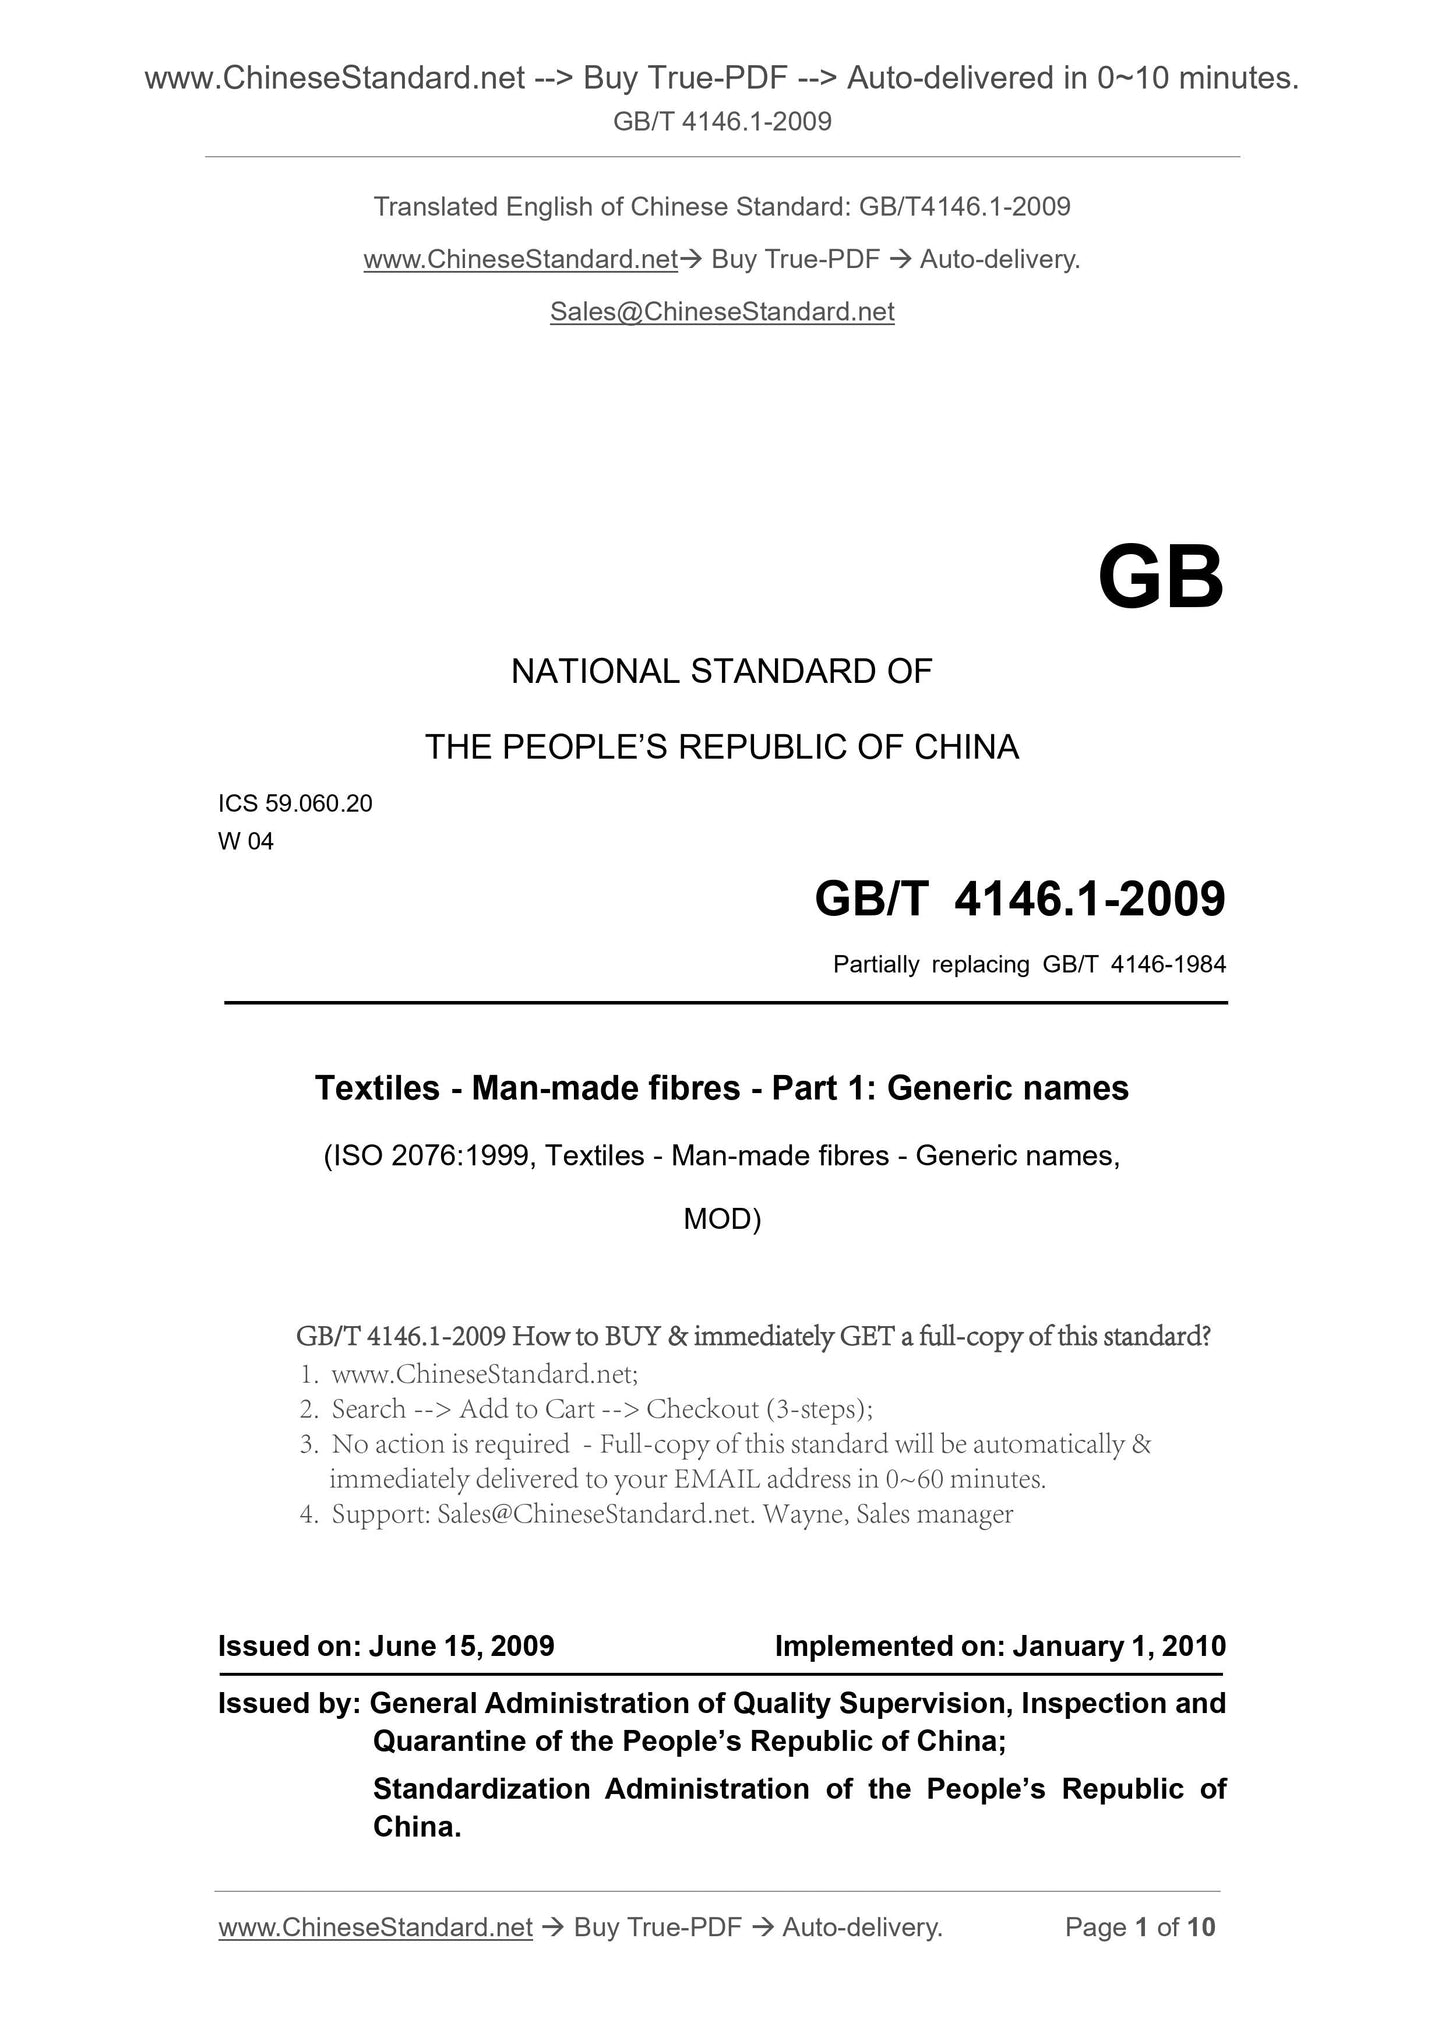 GB/T 4146.1-2009 Page 1